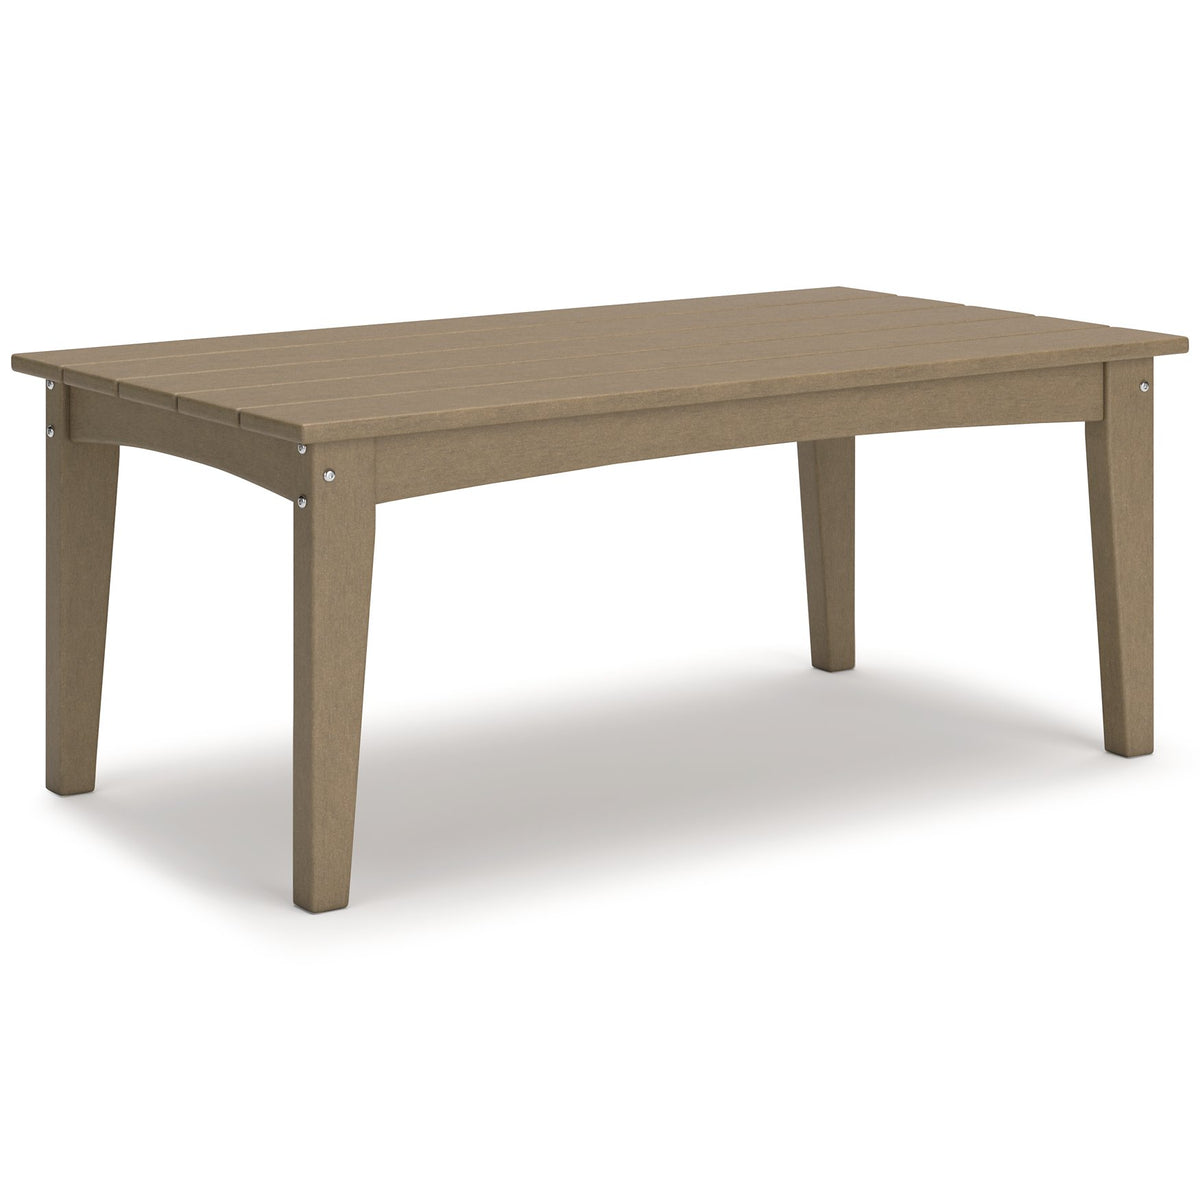 Hyland wave Outdoor Coffee Table  Las Vegas Furniture Stores